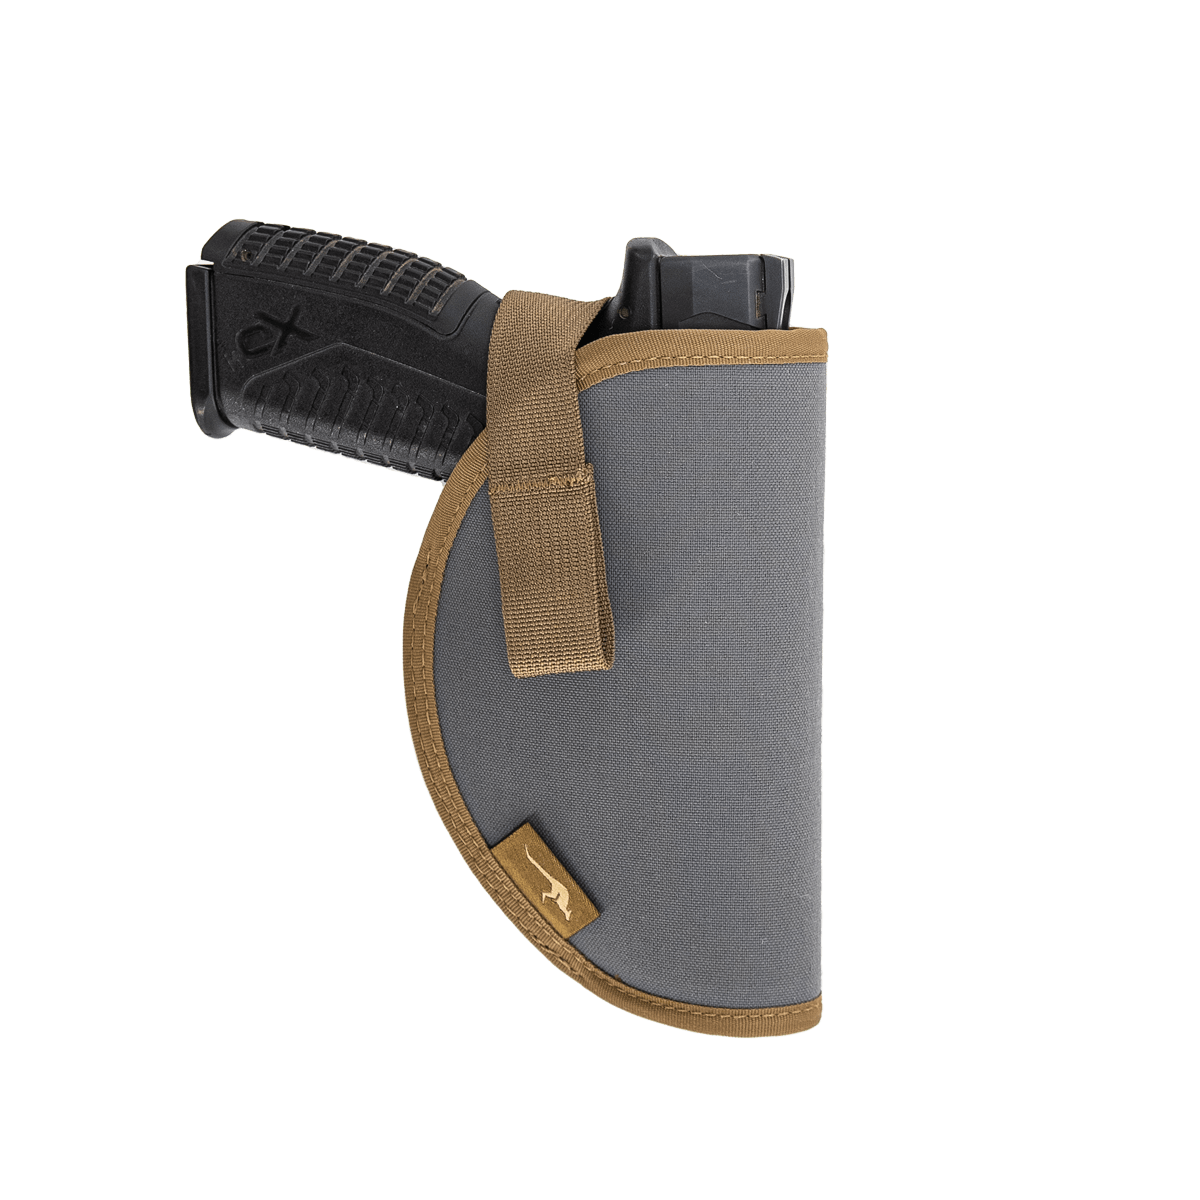 III. Drawbacks of Velcro Holster Attachments